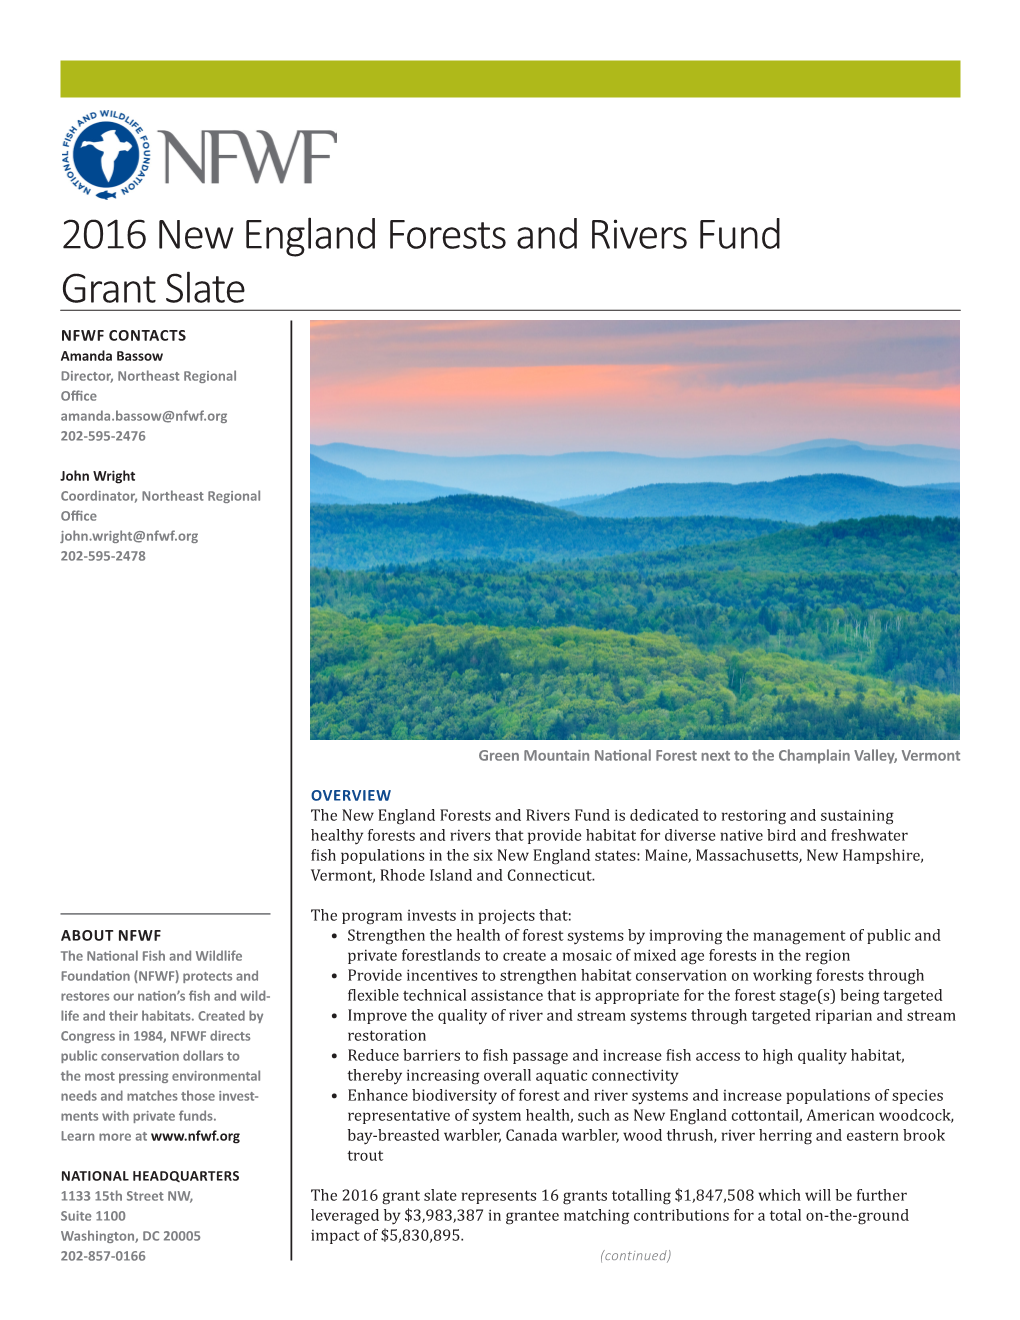 2016 New England Forests and Rivers Fund Grant Slate NFWF CONTACTS Amanda Bassow Director, Northeast Regional Office Amanda.Bassow@Nfwf.Org 202-595-2476